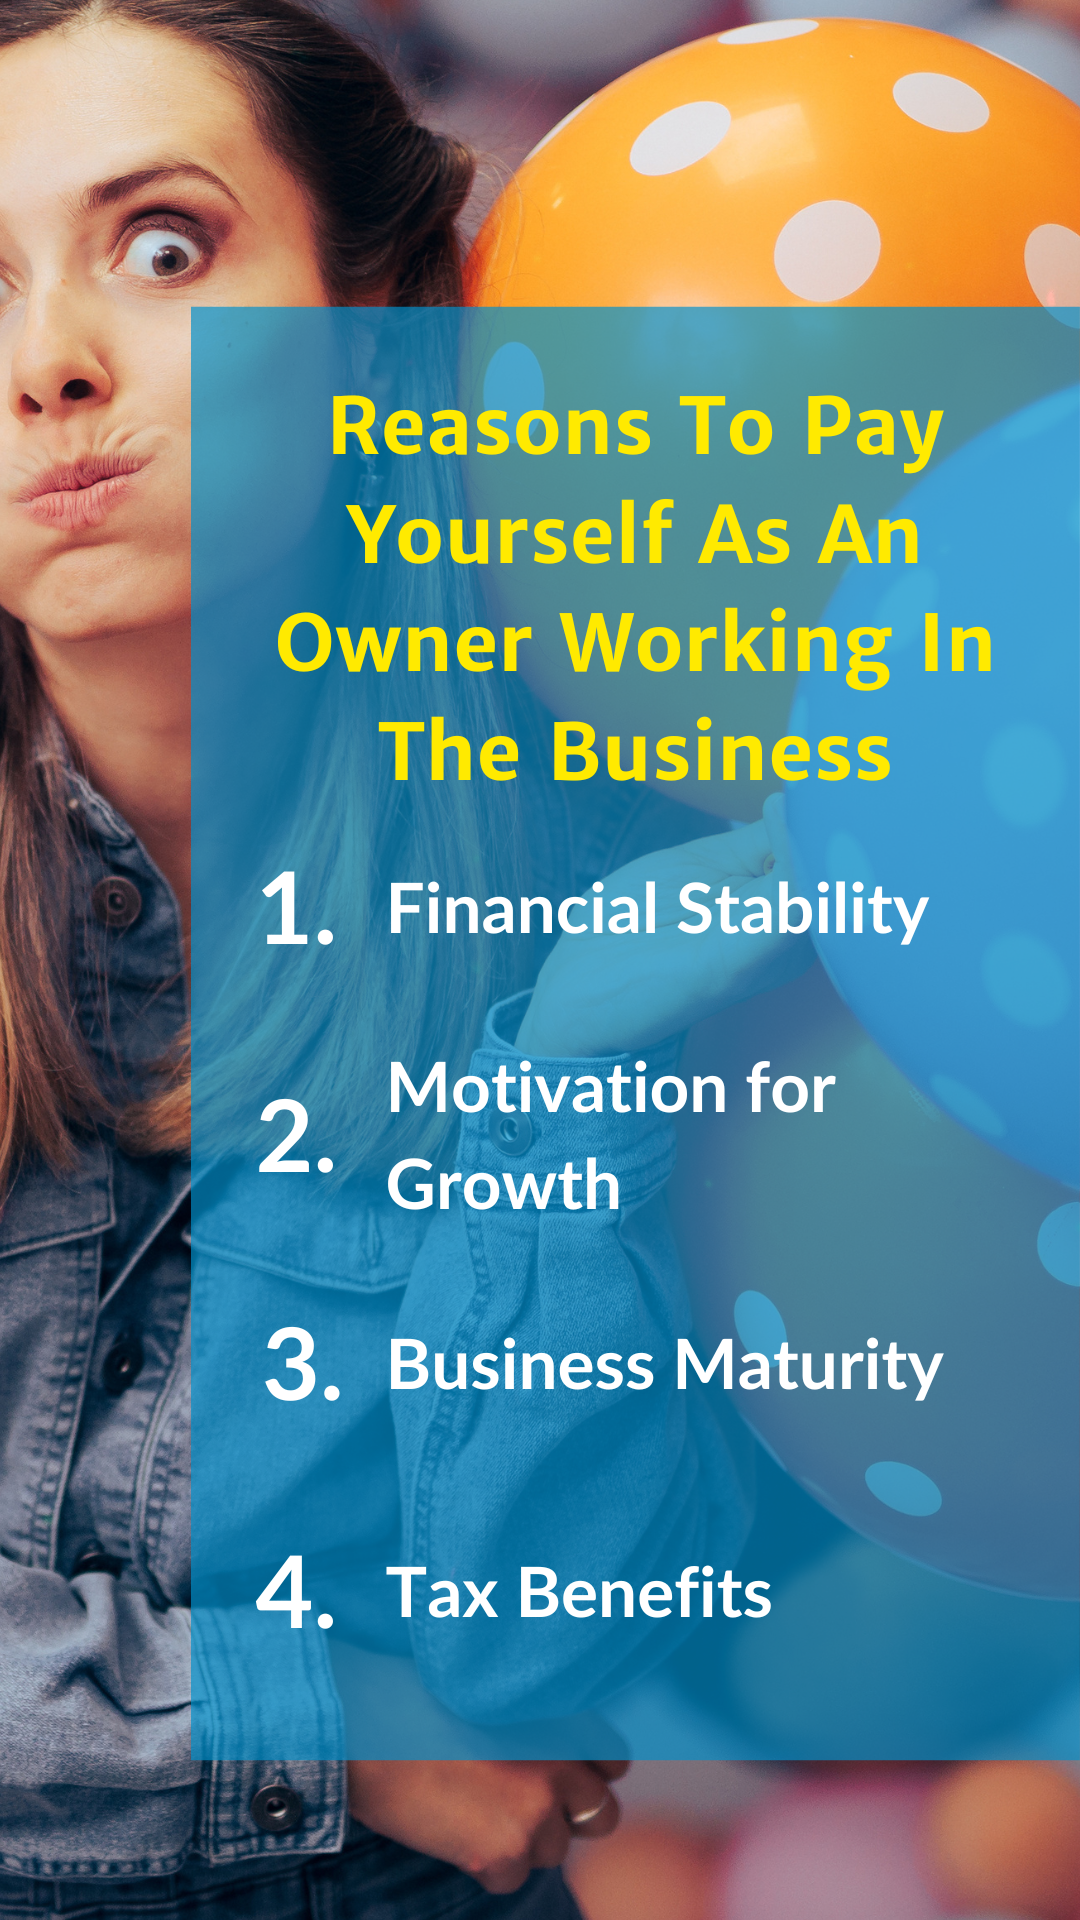 Reasons To Pay Yourself As An Owner Working In The Business